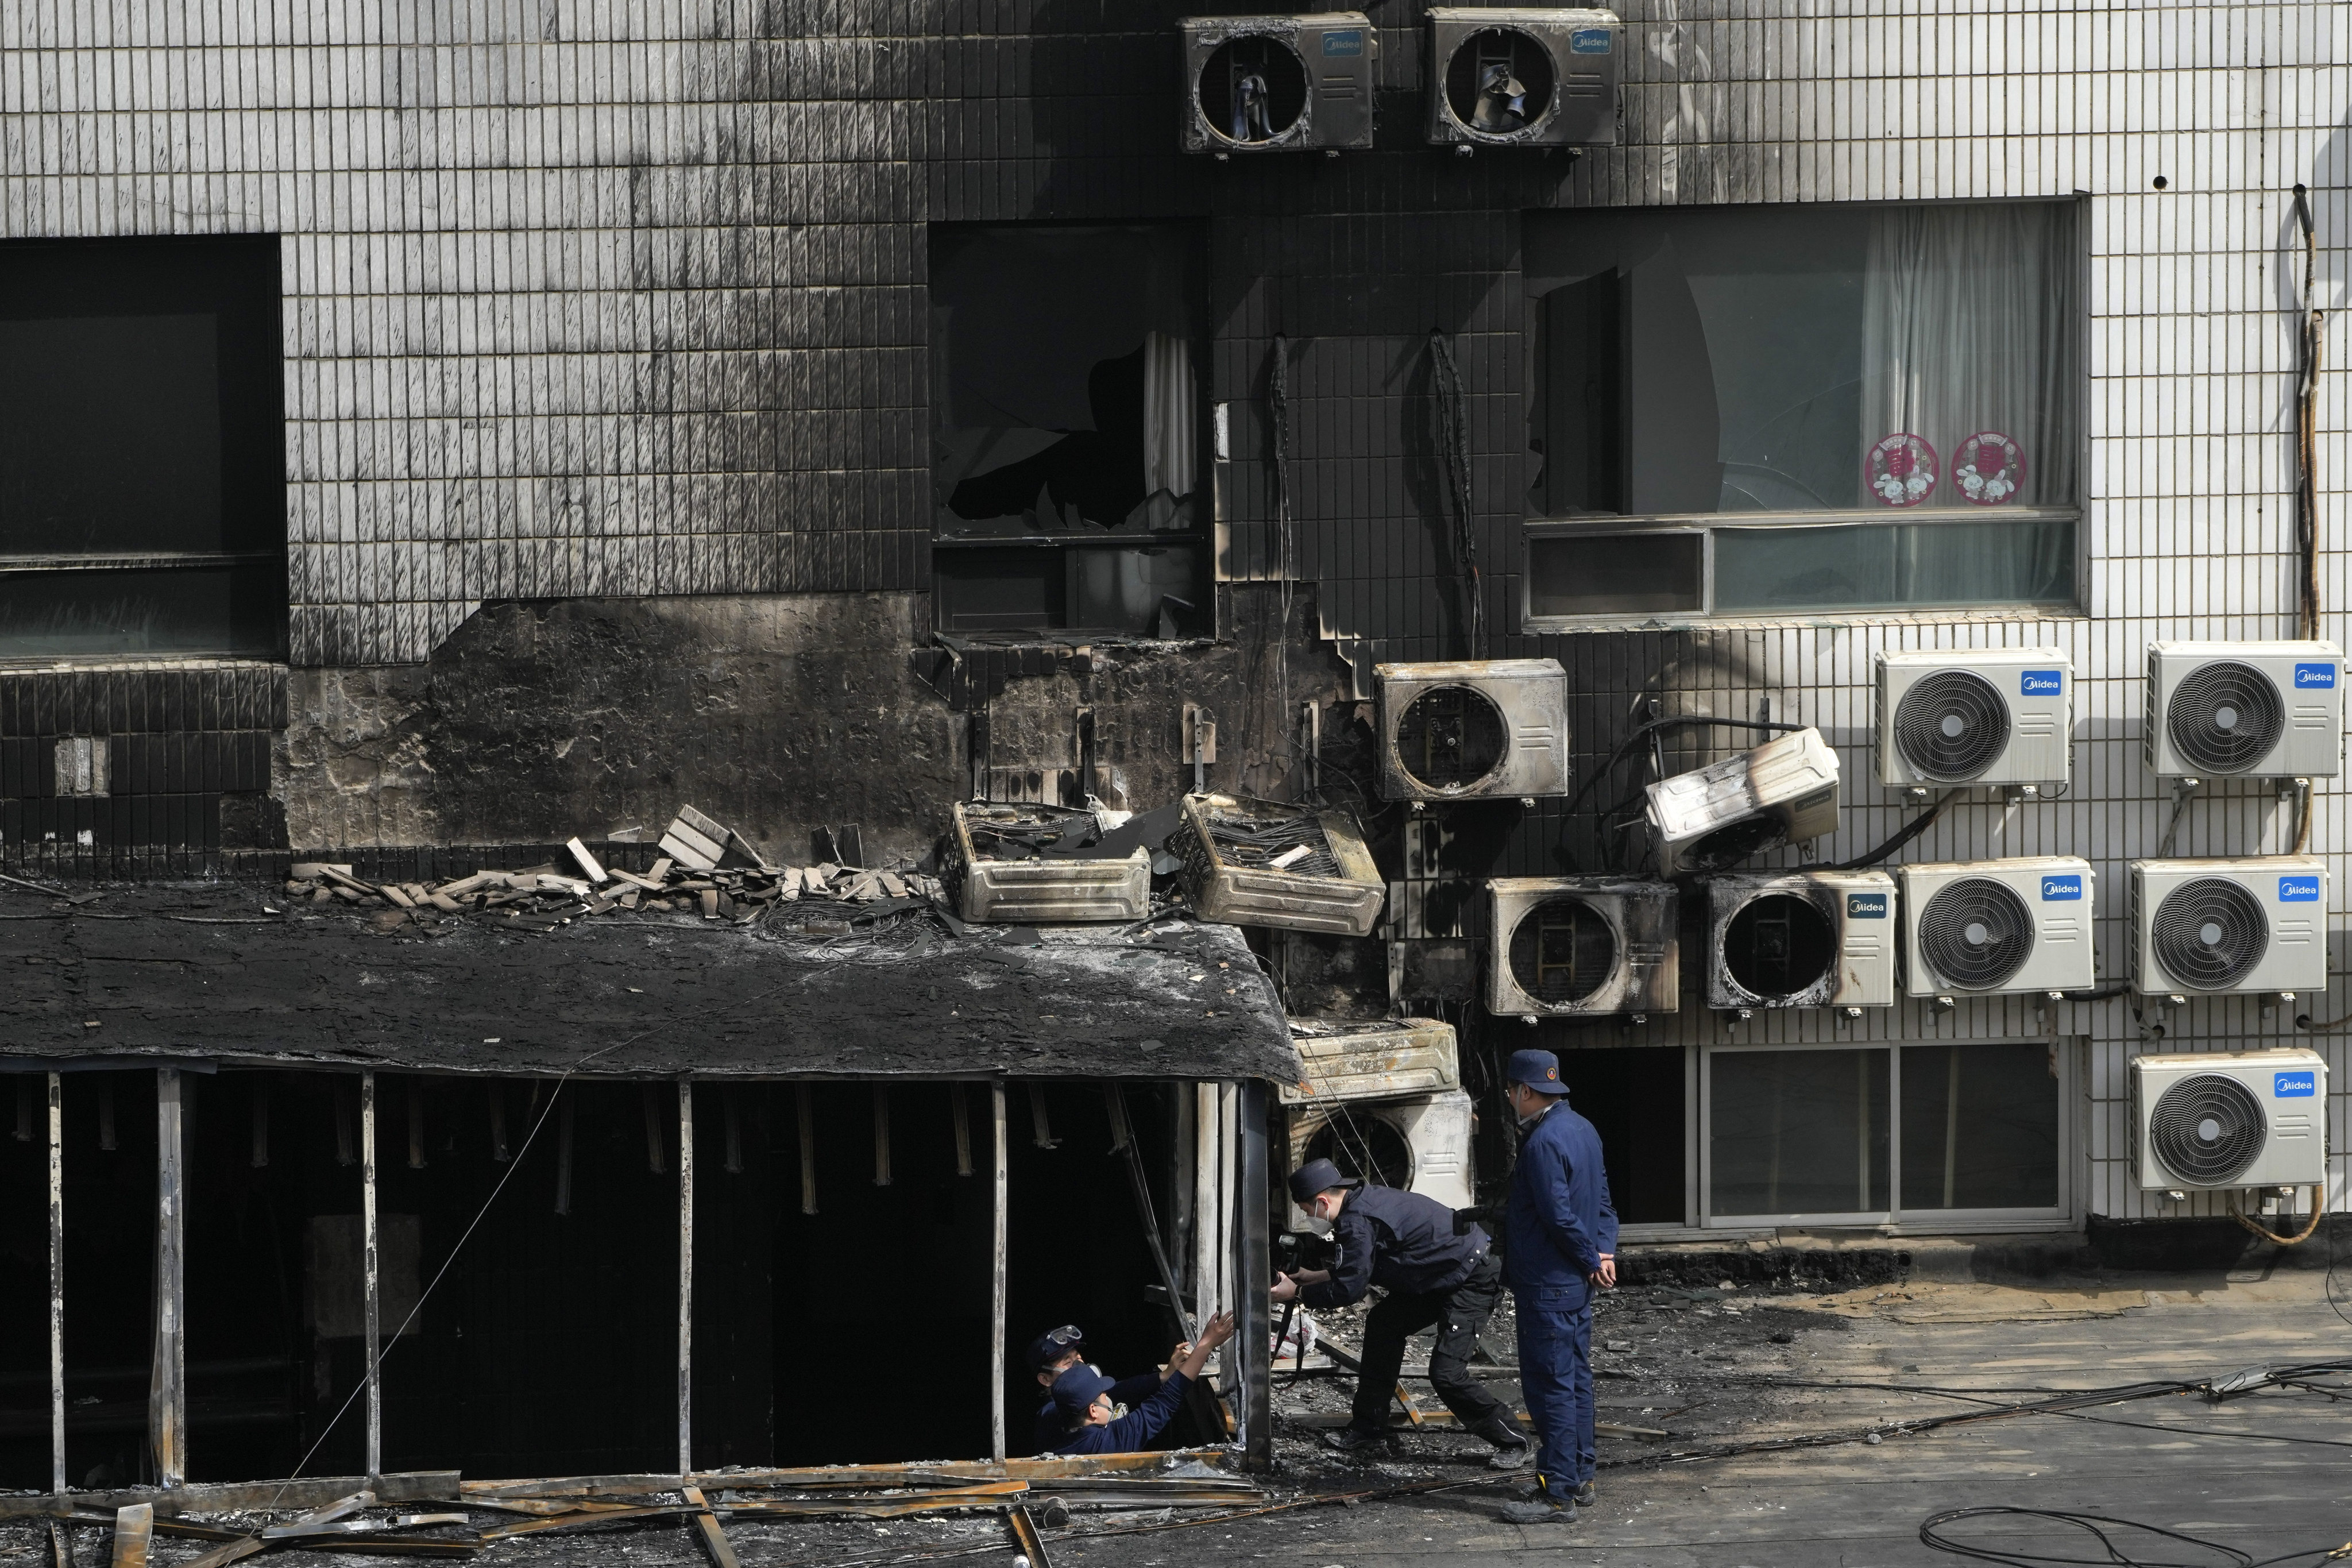 Investigators said irregularities in renovation work at the Changfeng Hospital had led to the fire. Photo: AP